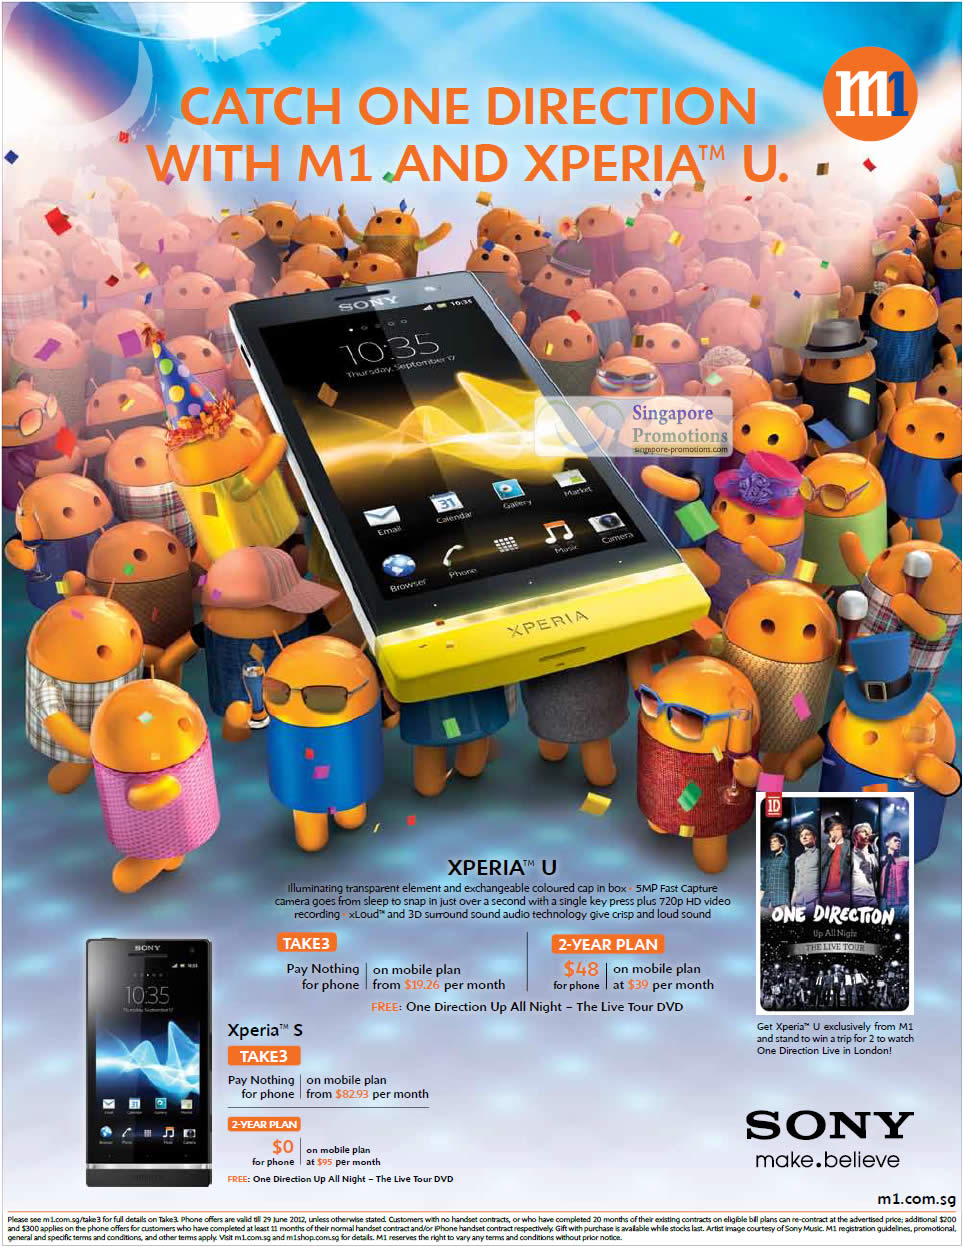 Featured image for M1 Smartphones, Tablets & Home/Mobile Broadband Offers 23 - 29 Jun 2012